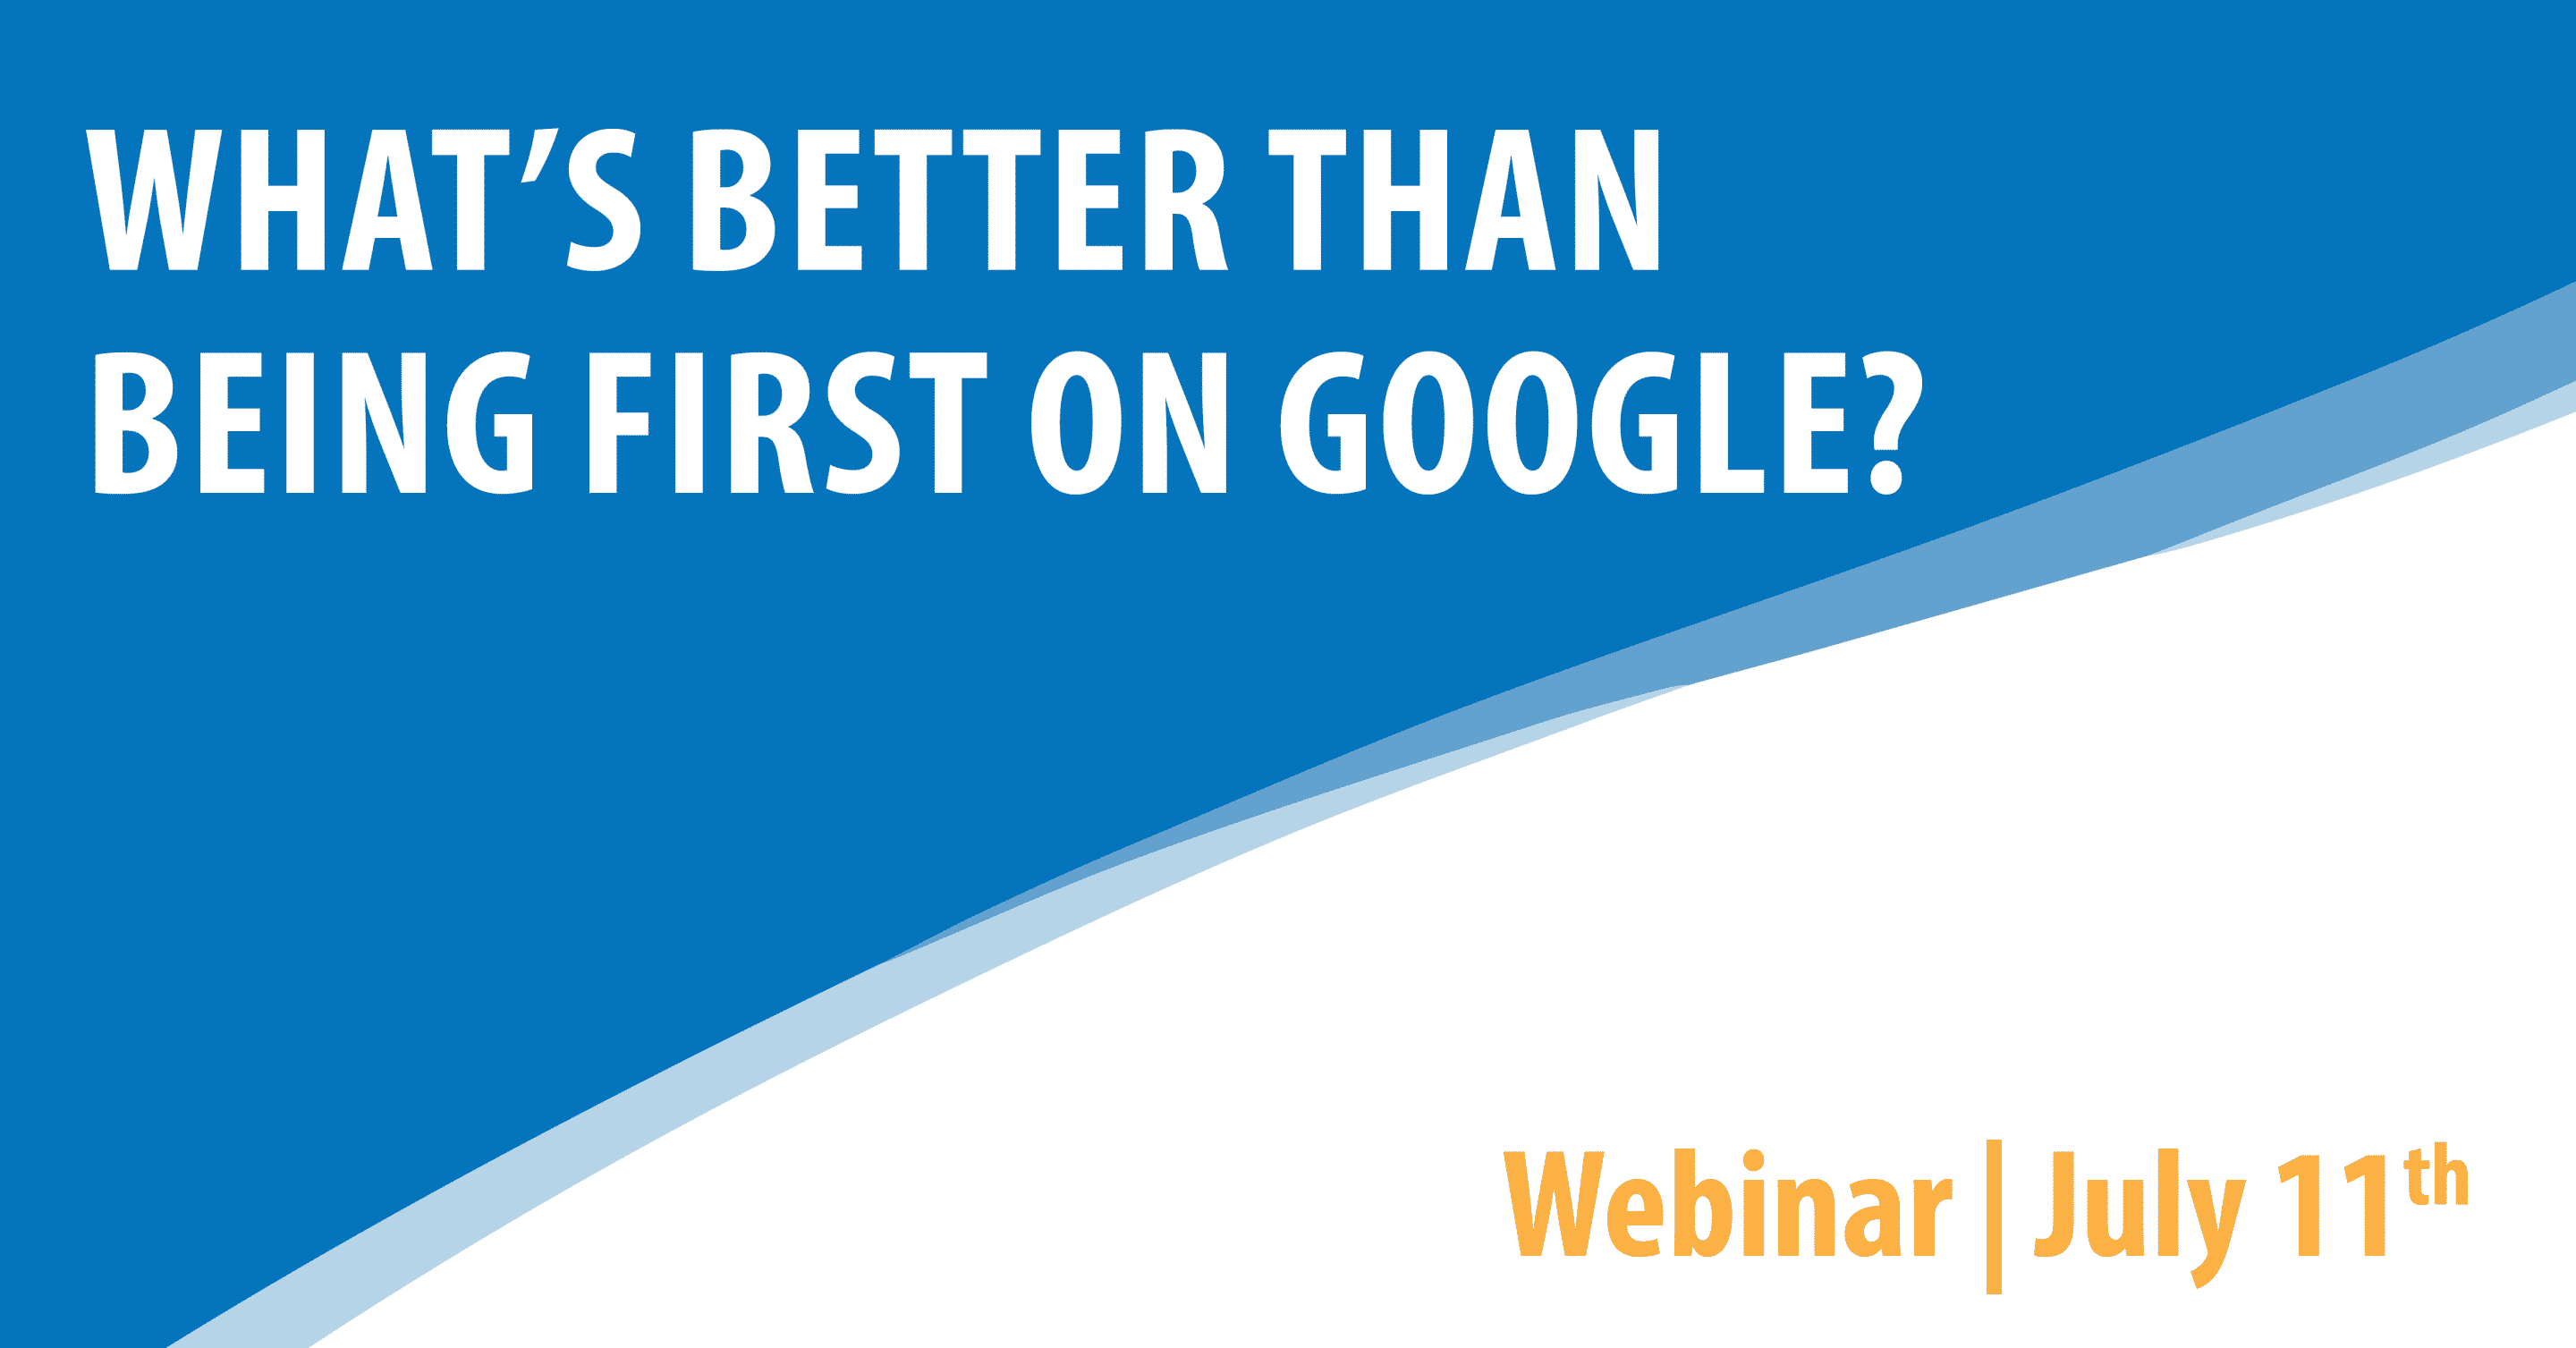 What's Better than Being First on Google?